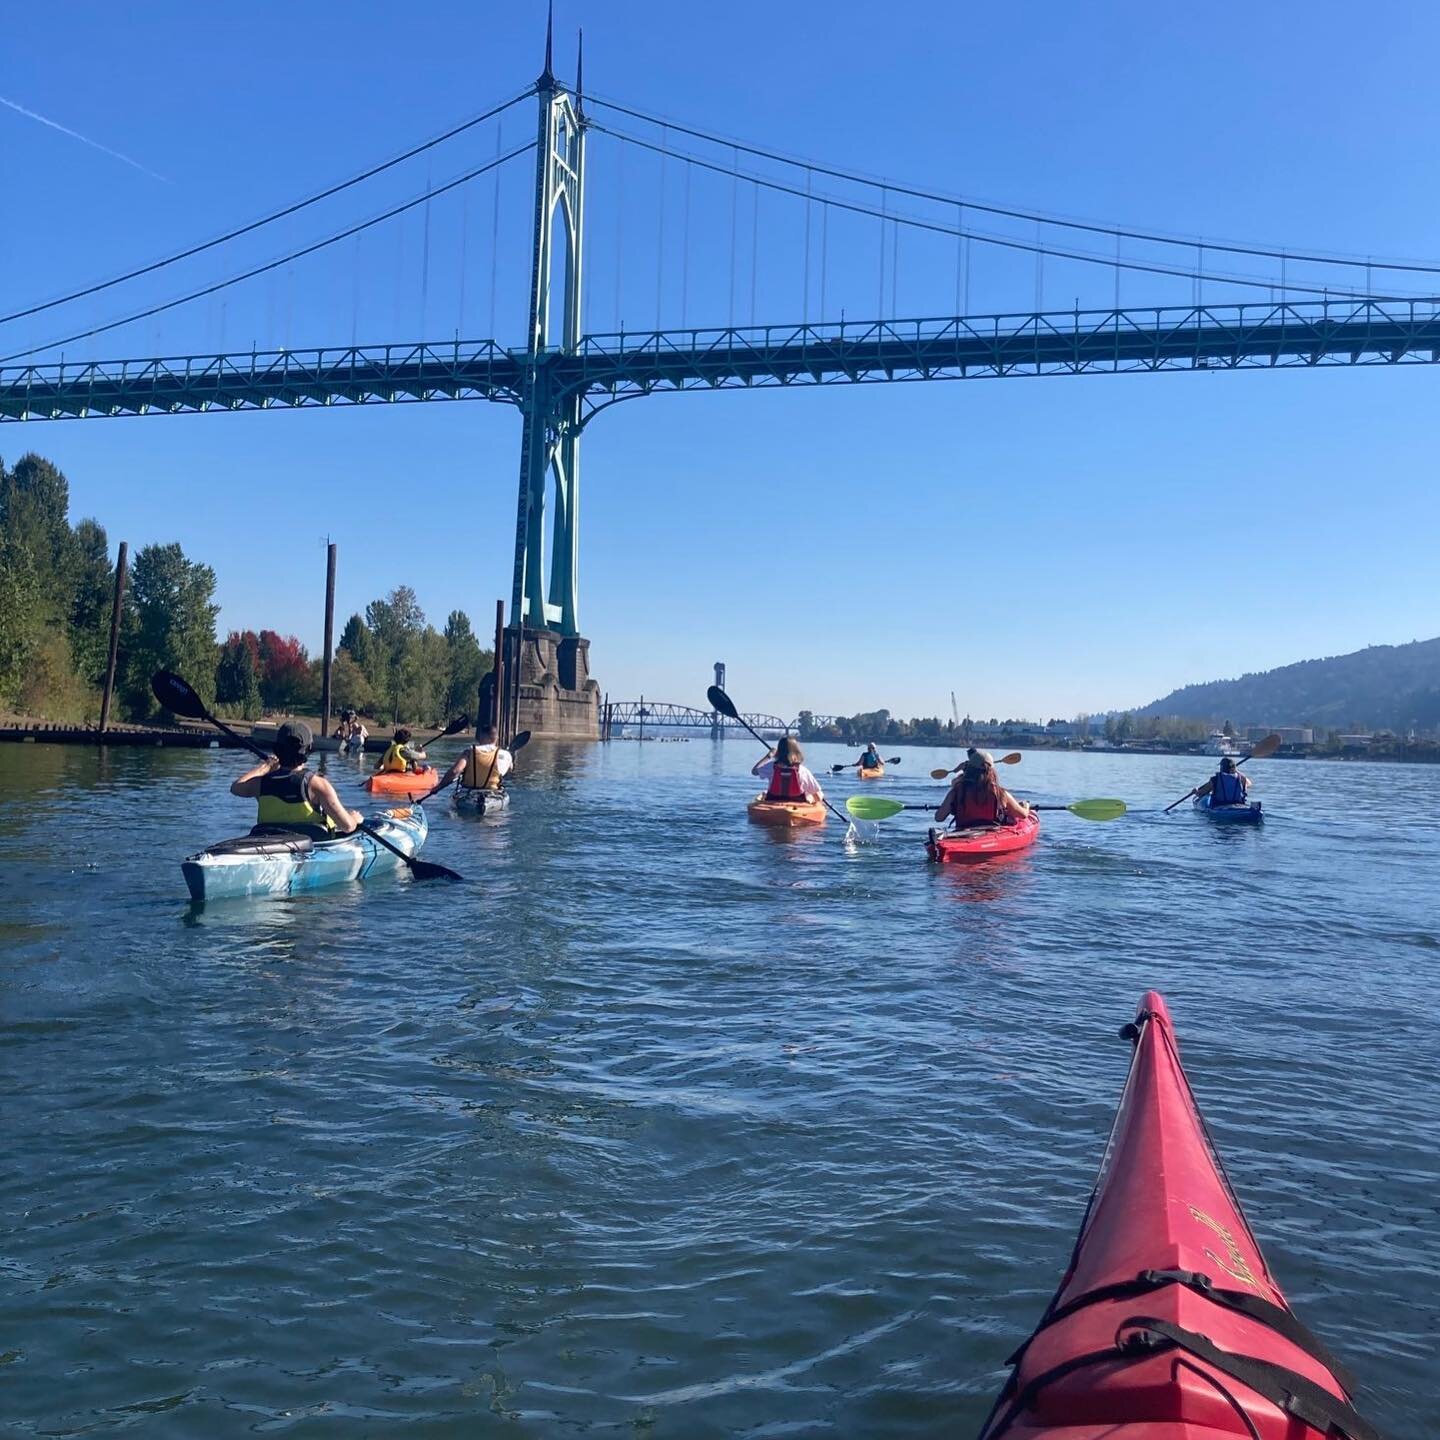 This Summer we got the chance to lead a direct action/ organizing training at the @budding_roses_pdx camp and chat about kayaktivism! A couple weeks ago, some of the Budding Roses counselors were able to join us for a kayak training and a paddle on t